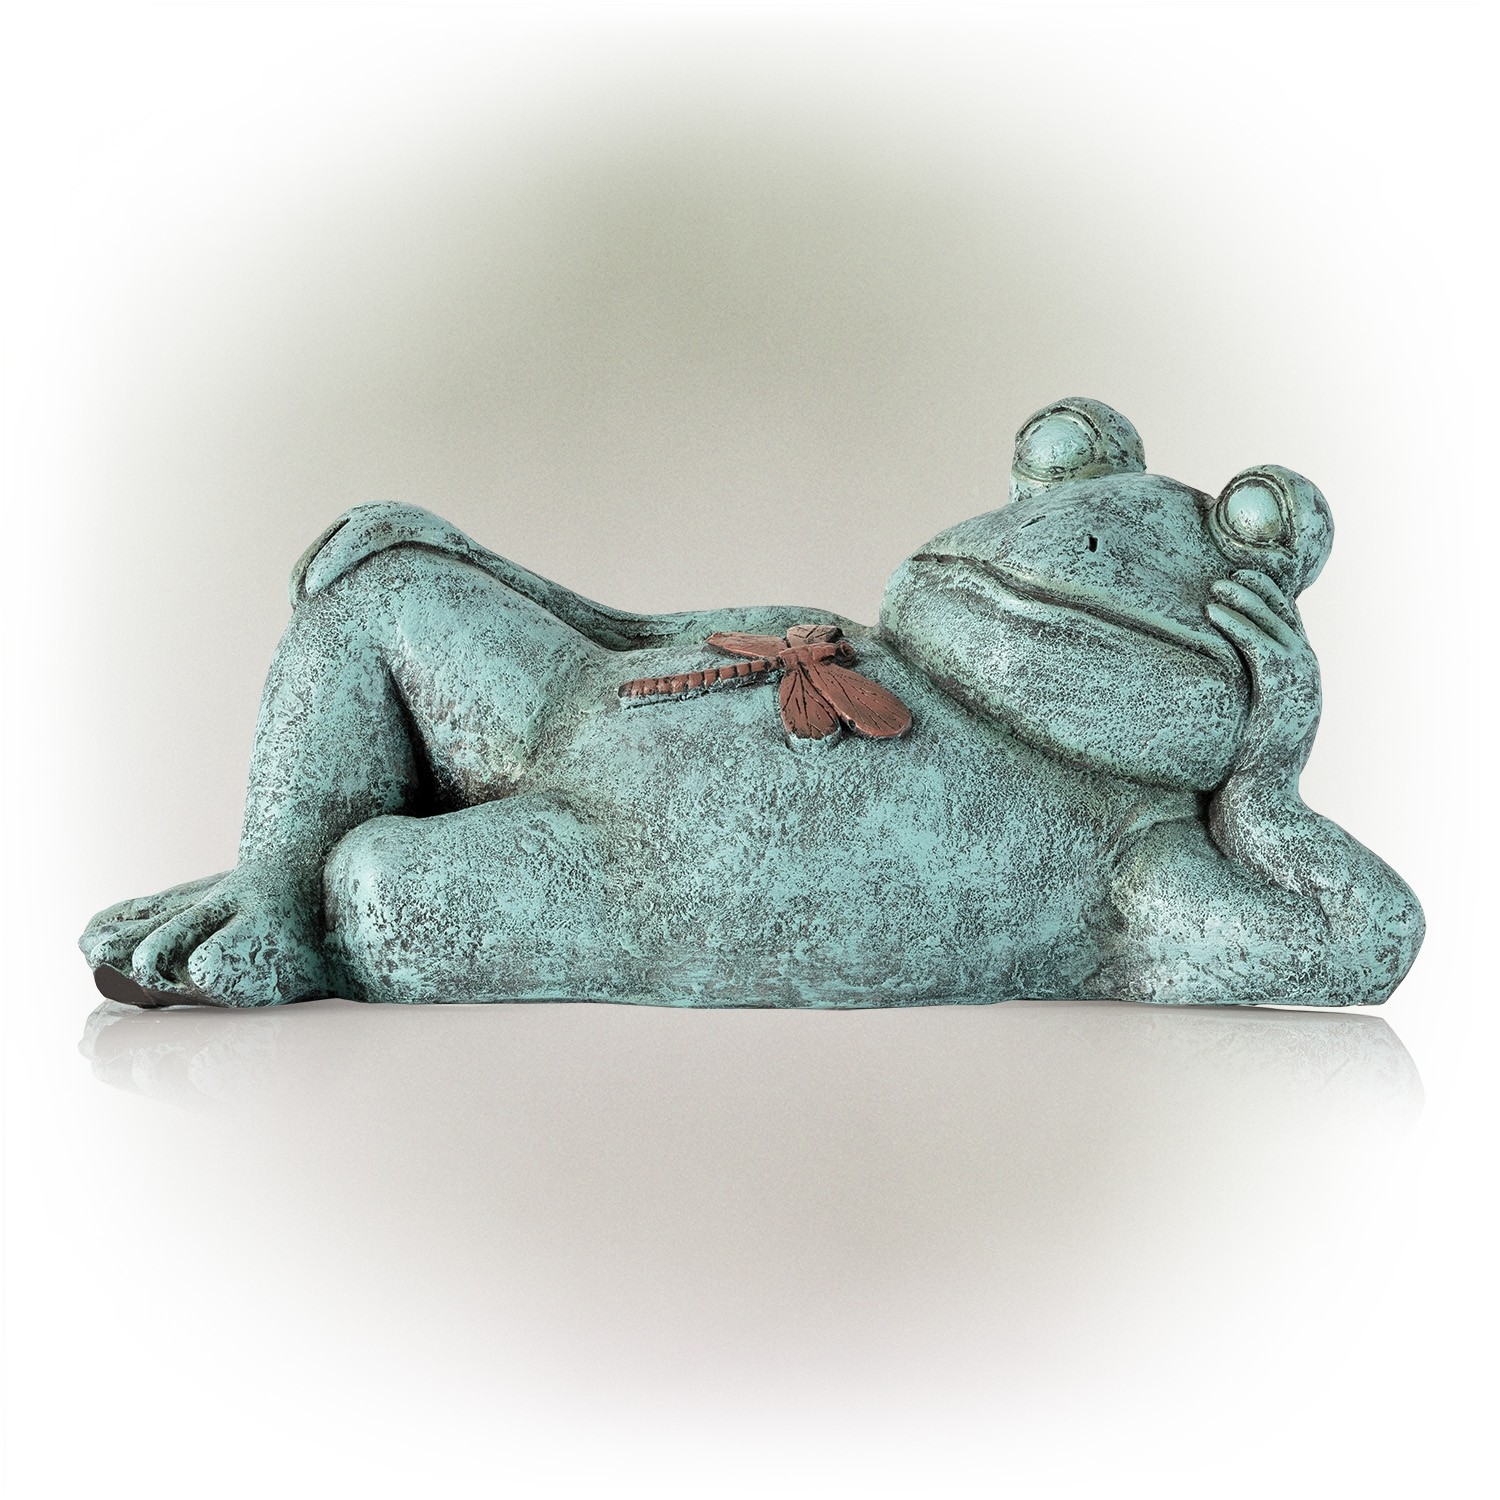 7" Sleeping and Relaxed Frog Garden Statue with Dragonfly